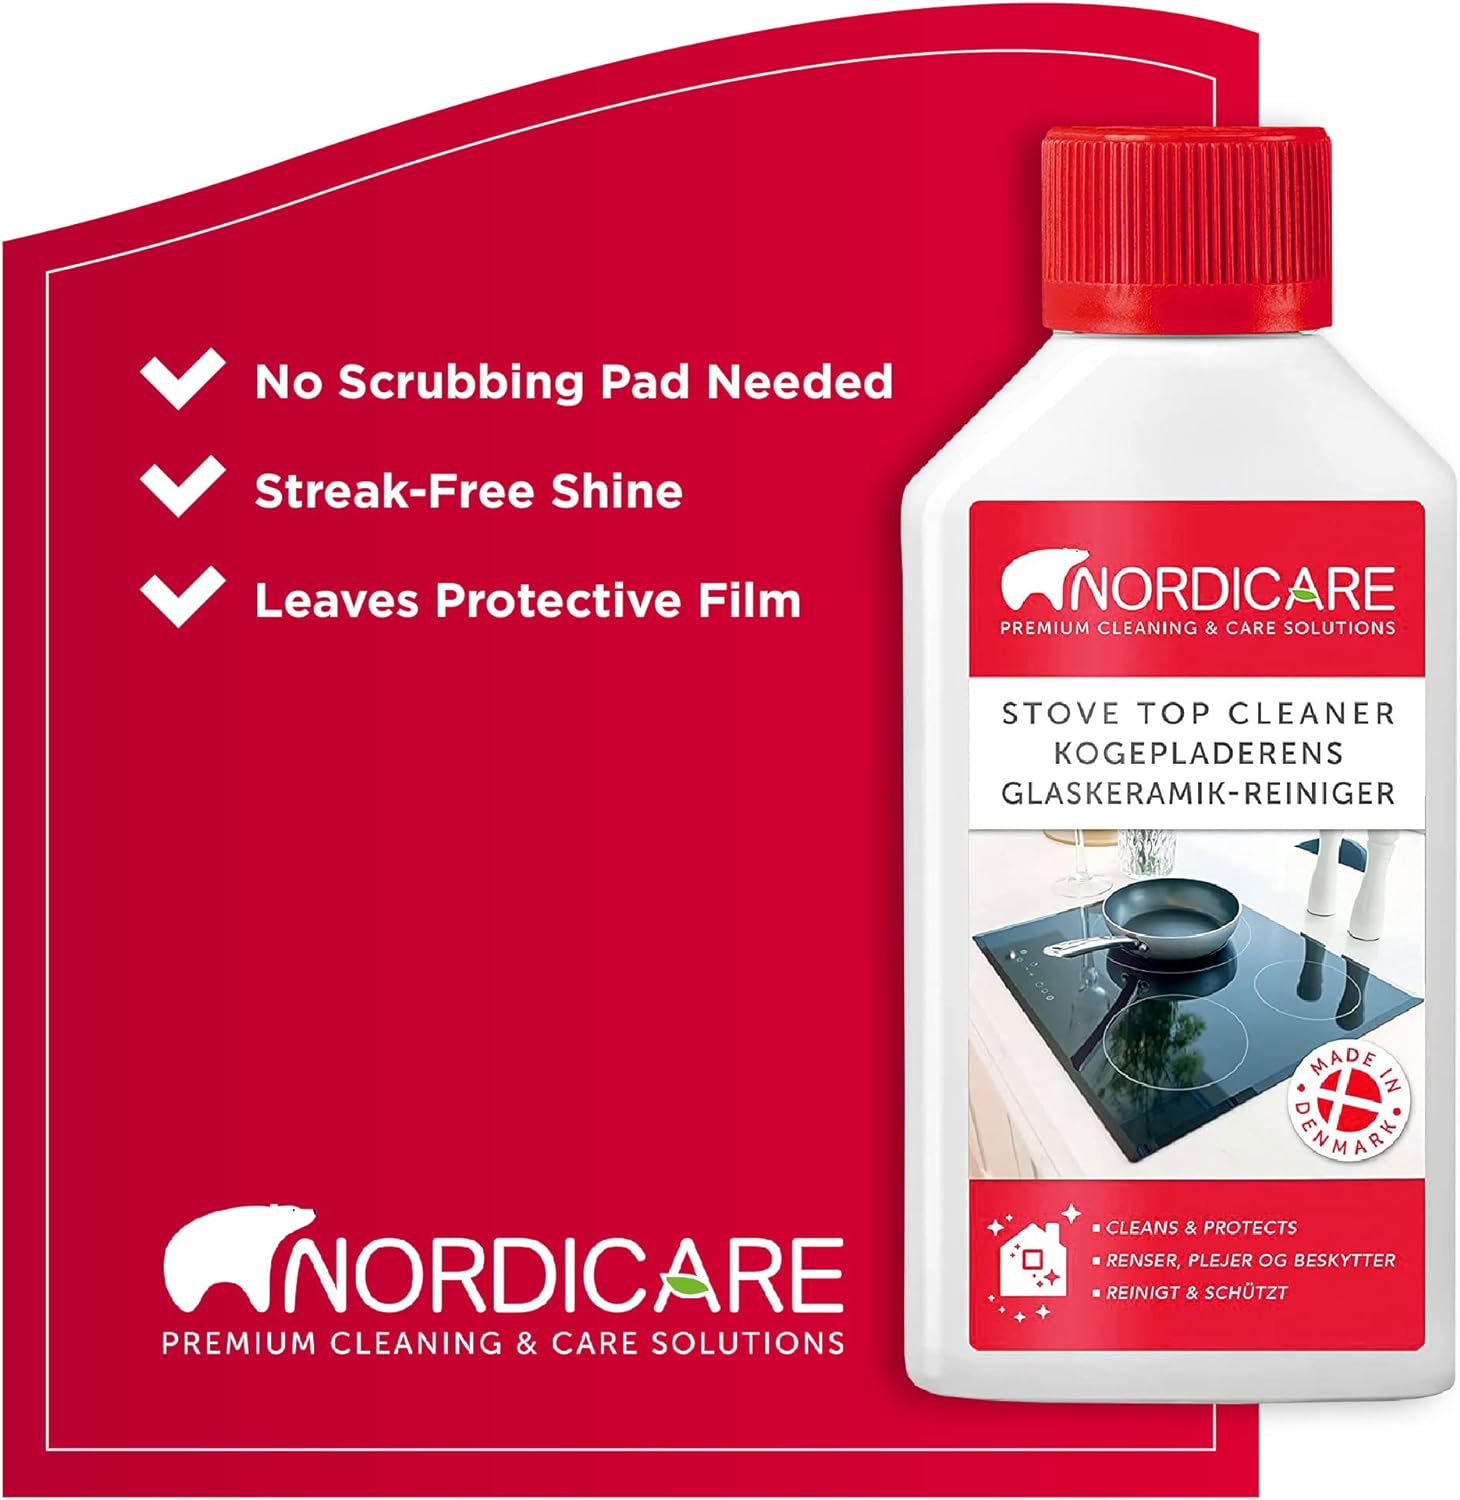 Nordicare Hob Cleaner Glass Ceramic - Induction Stove Top Cleaner Polish and Protector for Everyday Use - Made in Denmark (500ml) - Amazing Gadgets Outlet